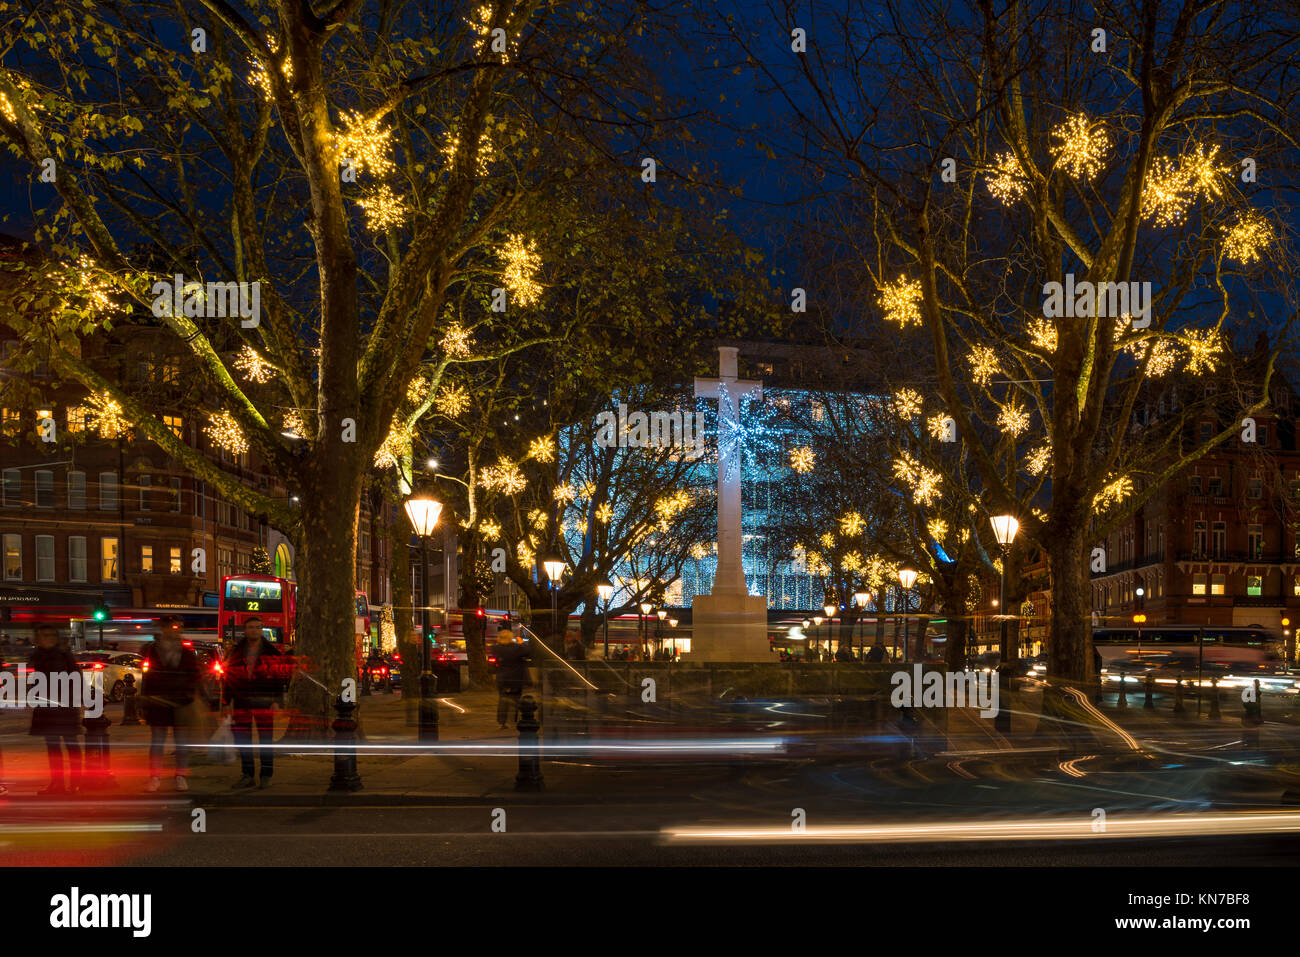 LONDON, UK - DECEMBER 09, 2017: Christmas Lights decorations on Sloane Square - a lovely, fashionable,  pedestrianized area in the Royal Borough of Ke Stock Photo